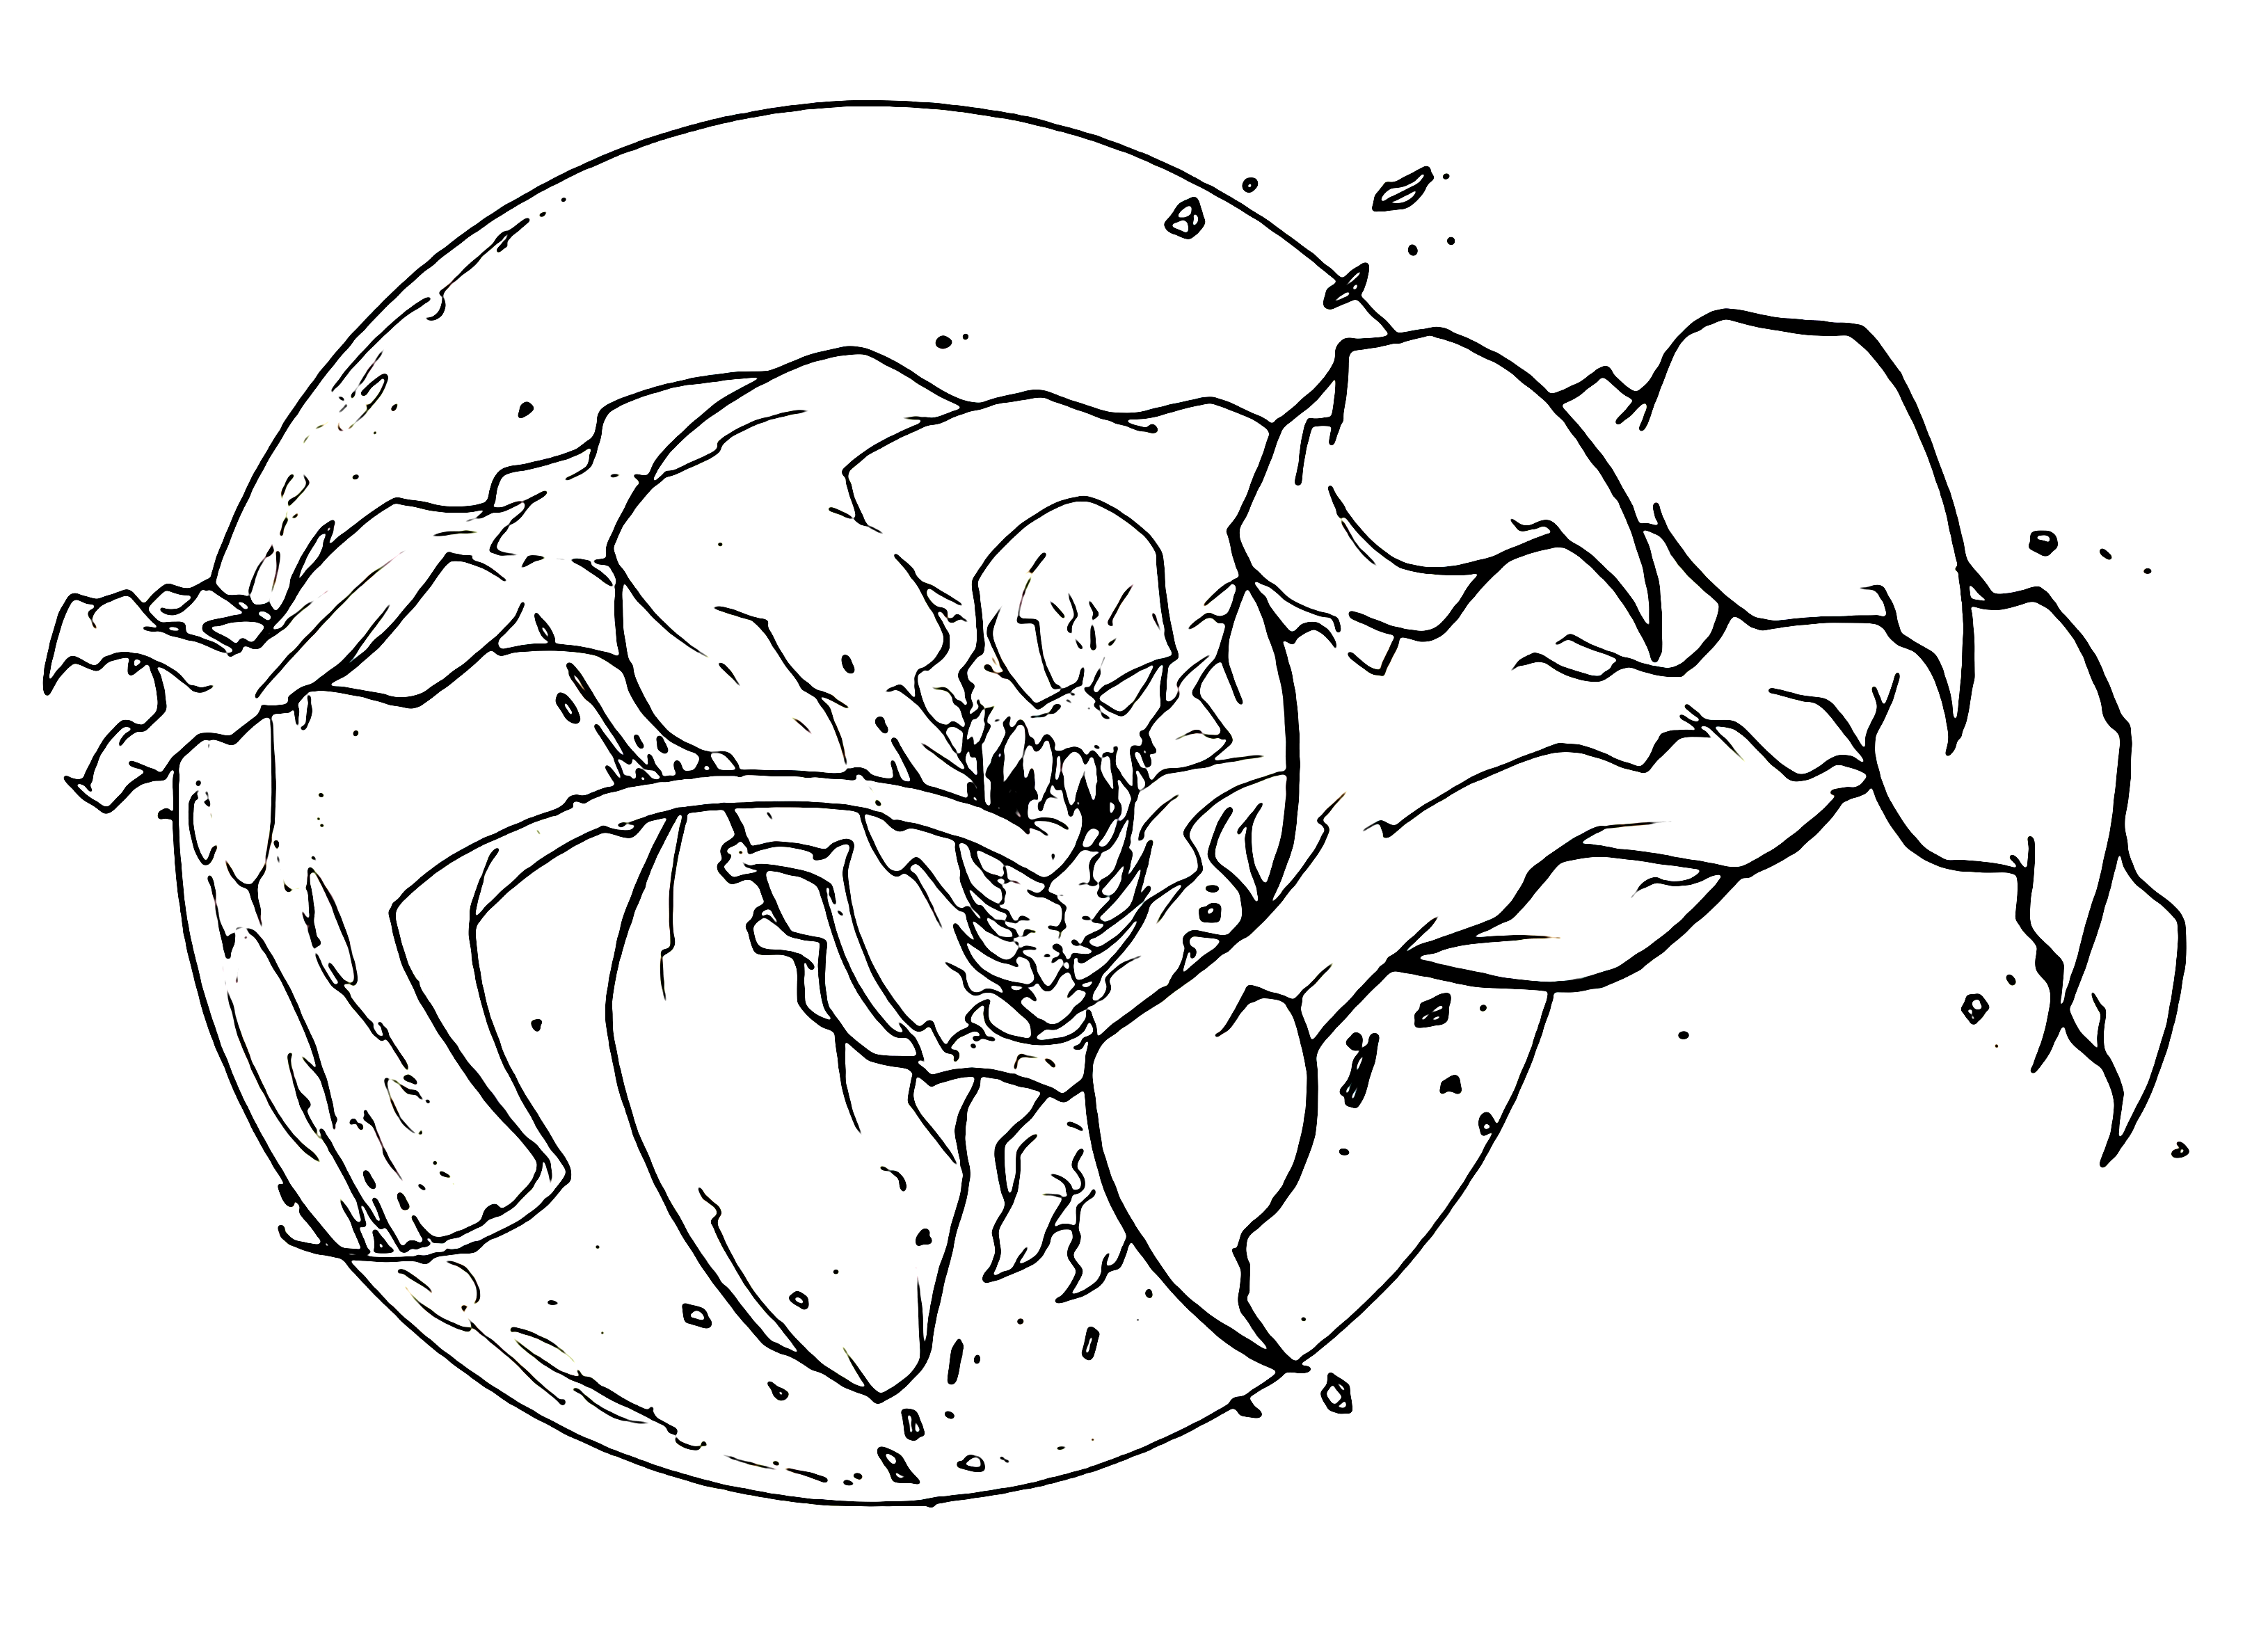 Venom is Anry Coloring Page Free